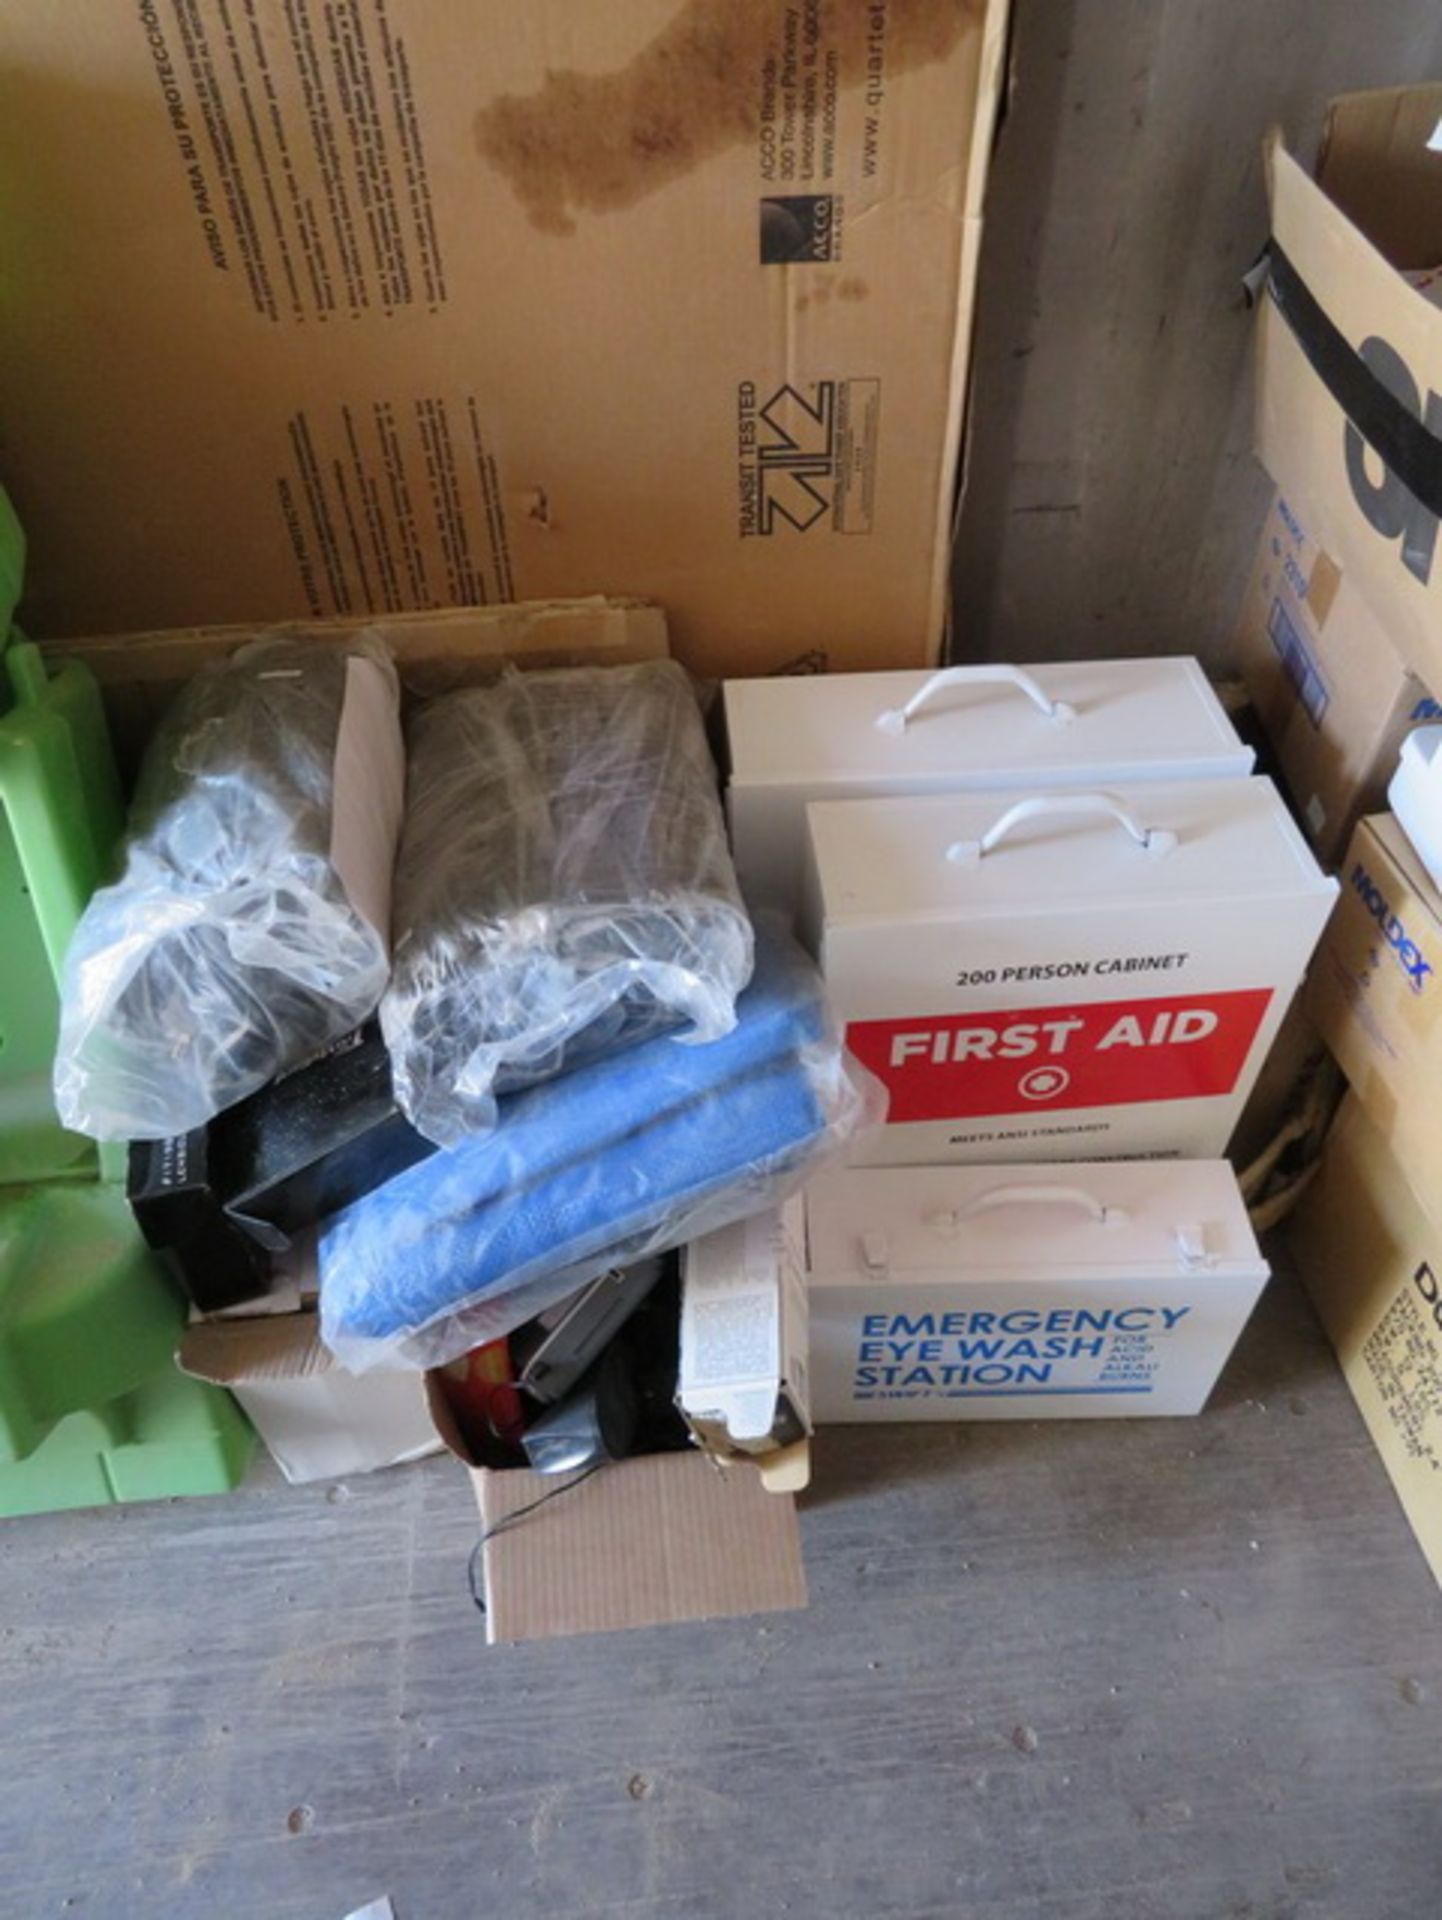 Contents of Shipping Container. To Include 1/2" PVDF Tubing, Safety Glasses, Safety Signs, - Image 20 of 51